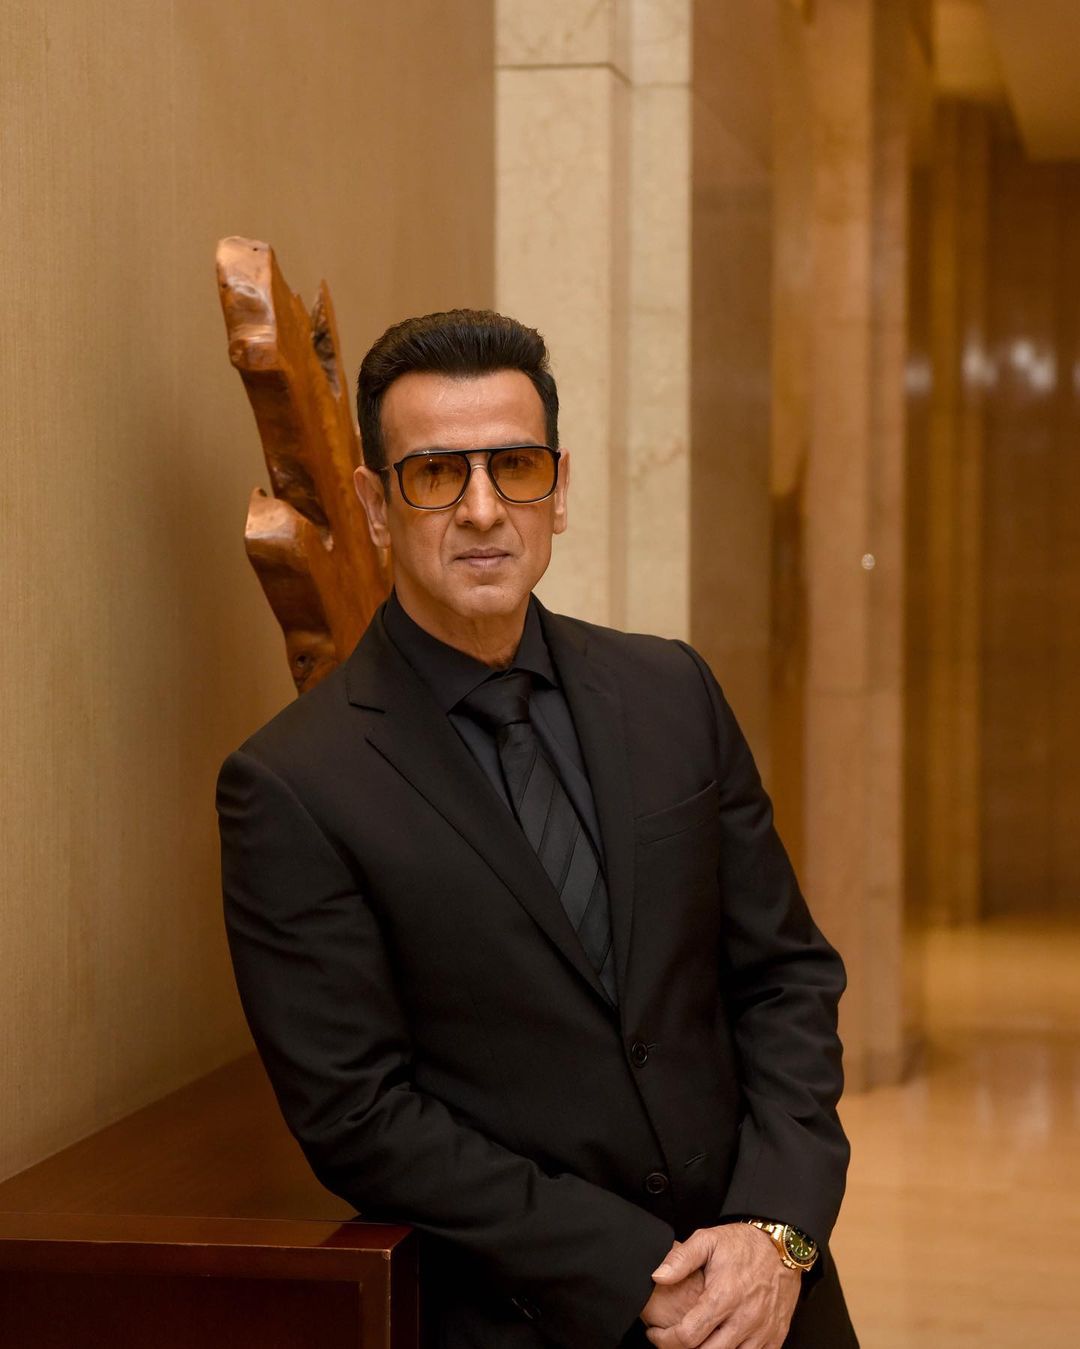 Ronit Roy Celebrates His 58th Birthday With A Quiet Dinner Who Received Warm Wishes From His Family, Friends And Colleagues. 